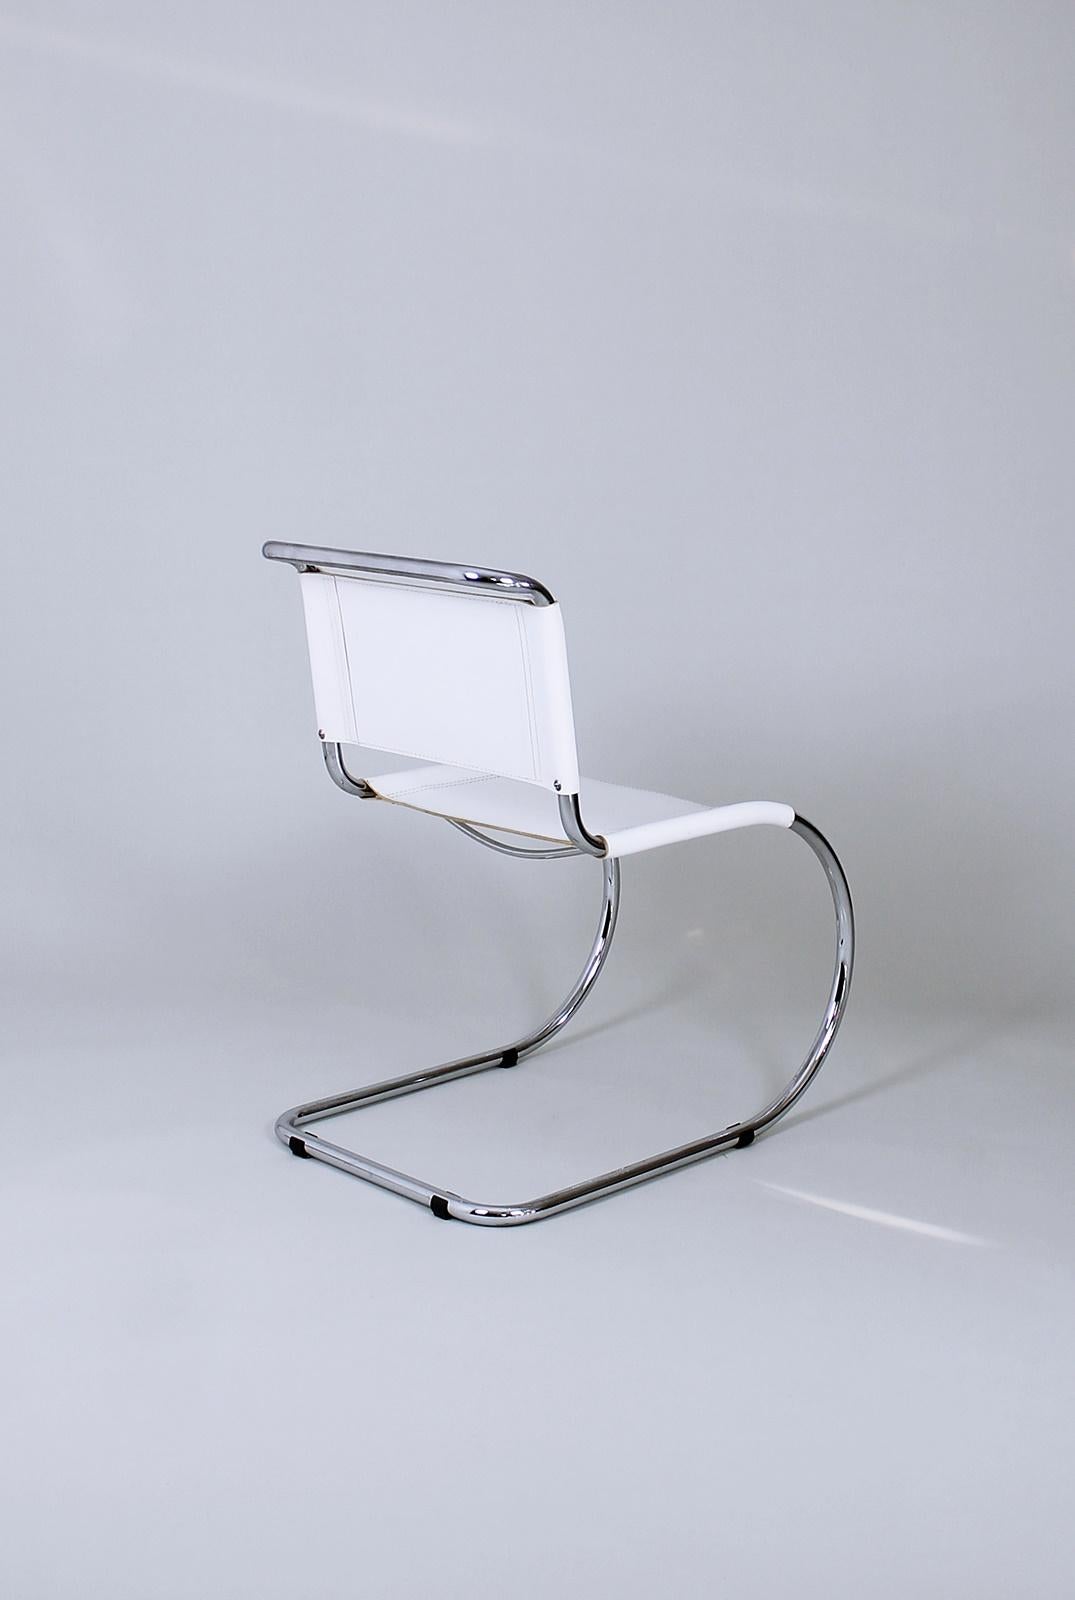 Chrome Bauhaus Classic MR 10 Chairs by Ludwig Mies van der Rohe Germany, 1980s For Sale